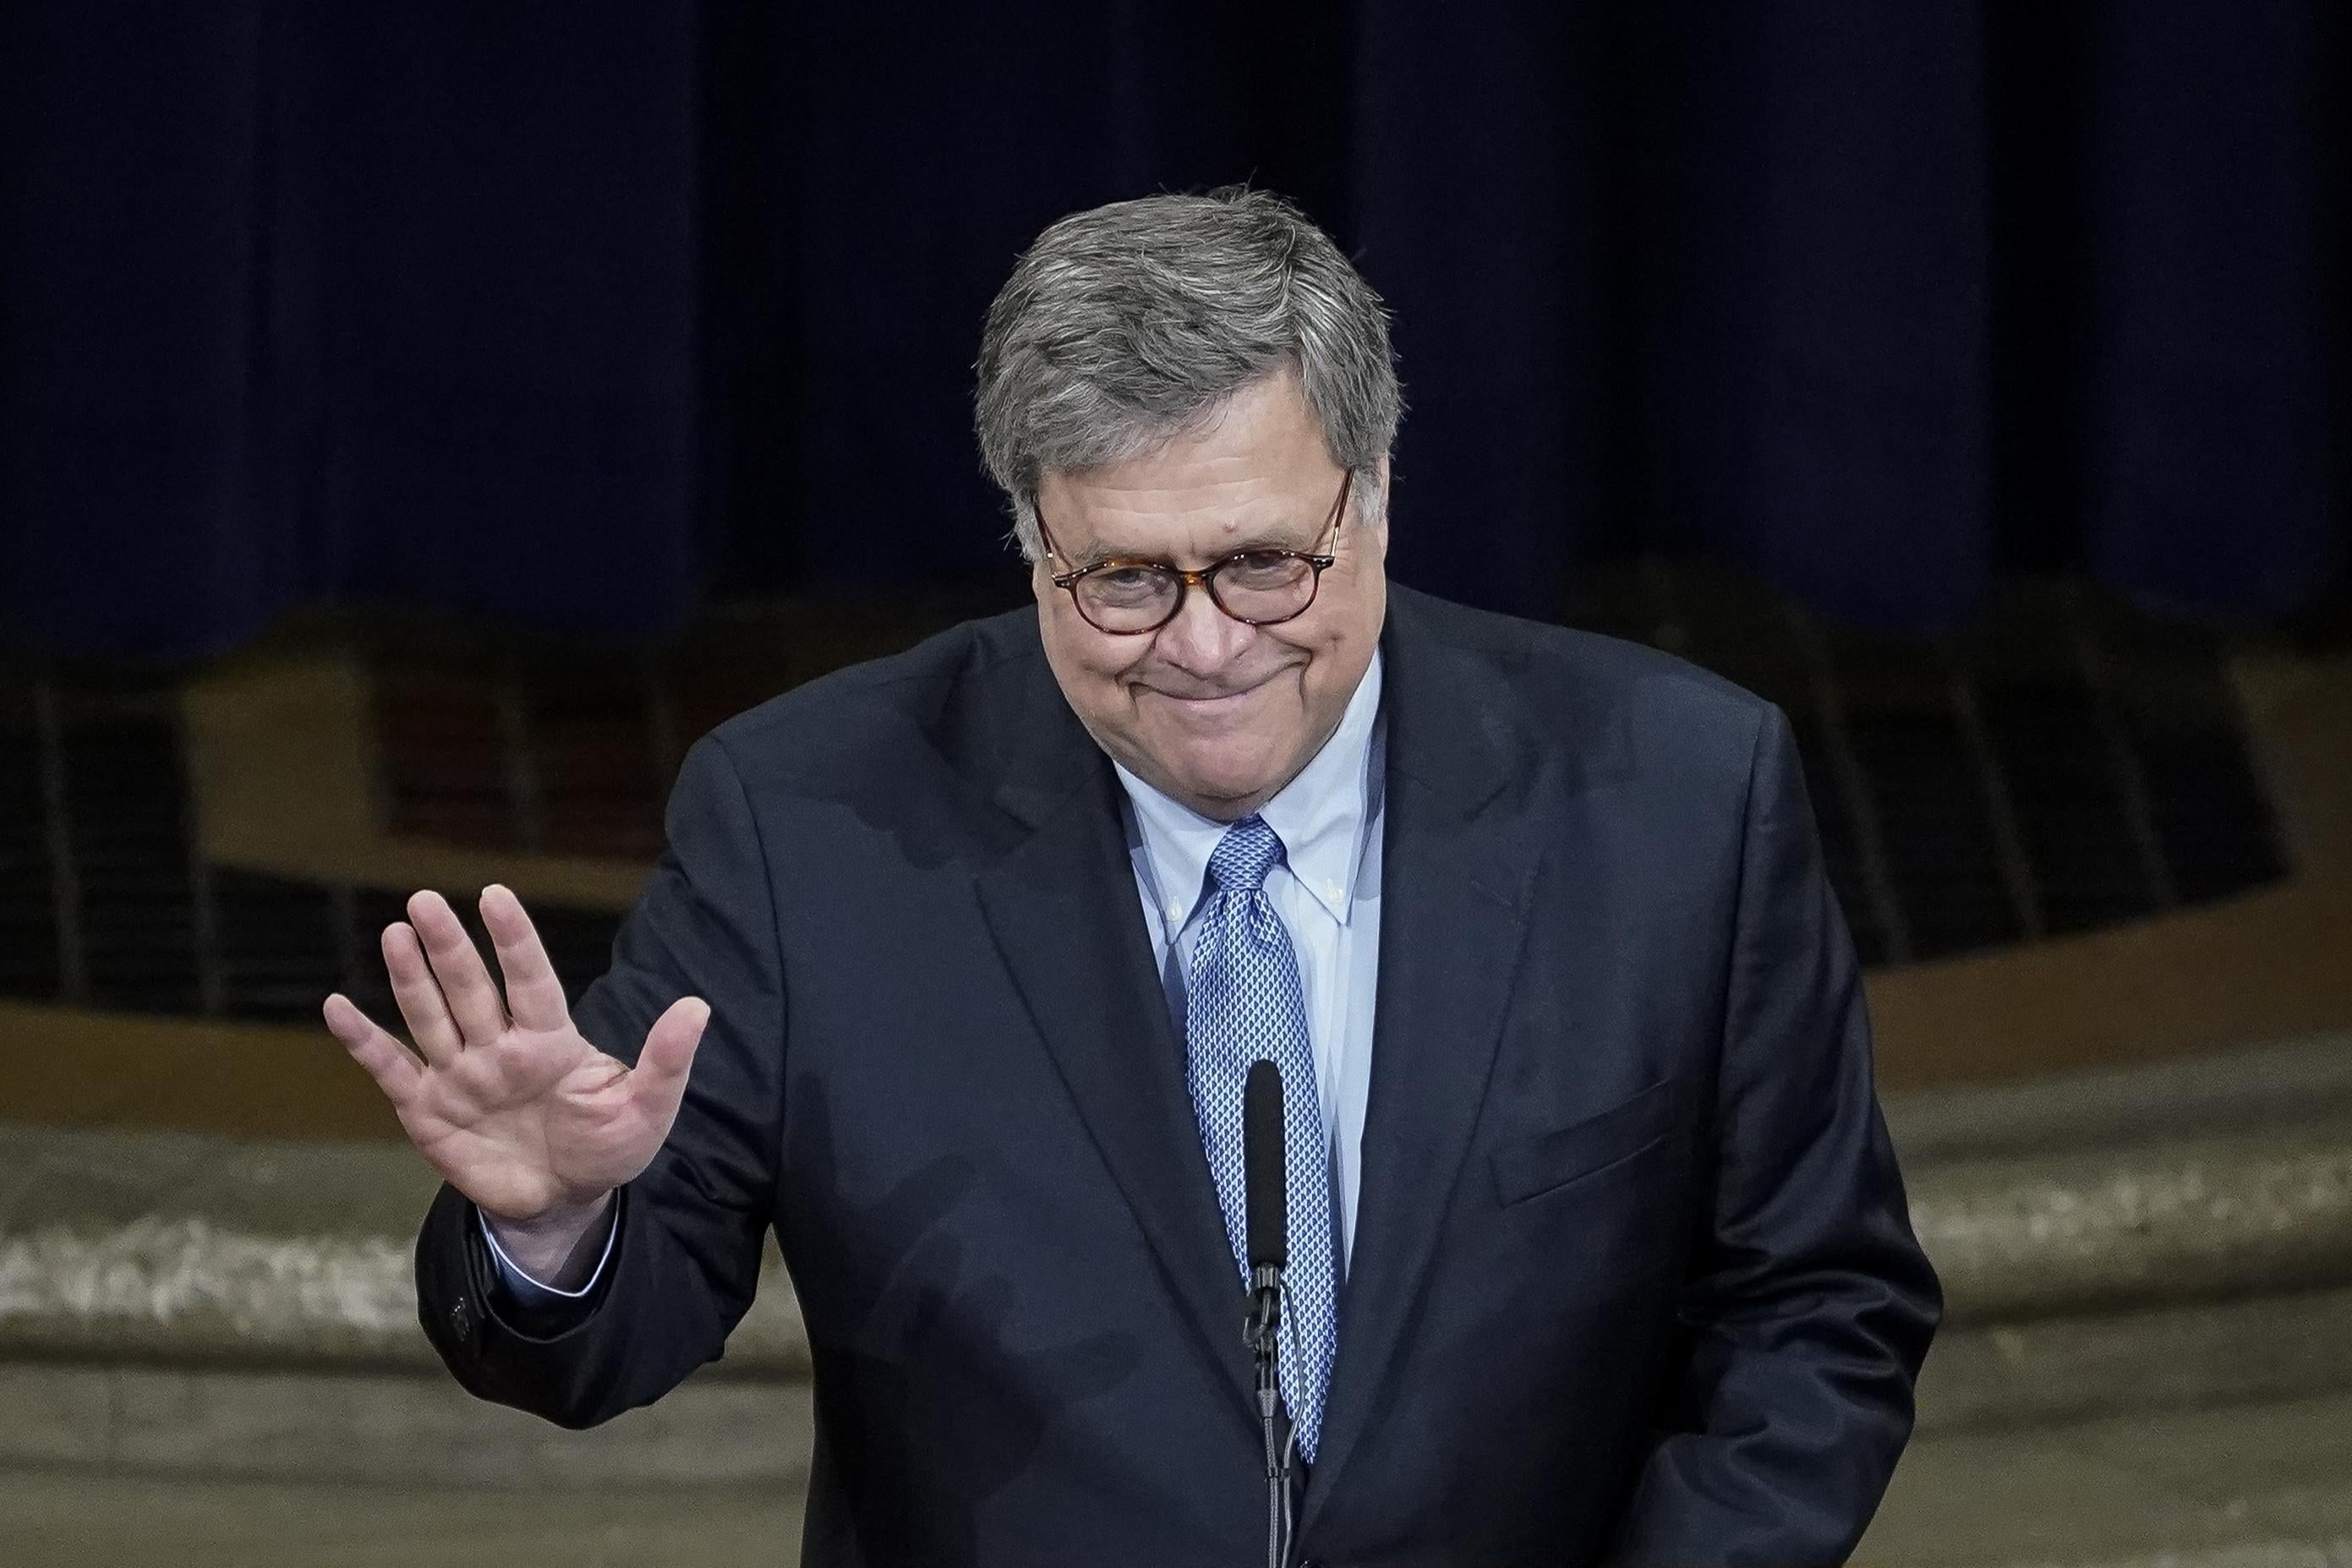 William Barr with his weasel grin.